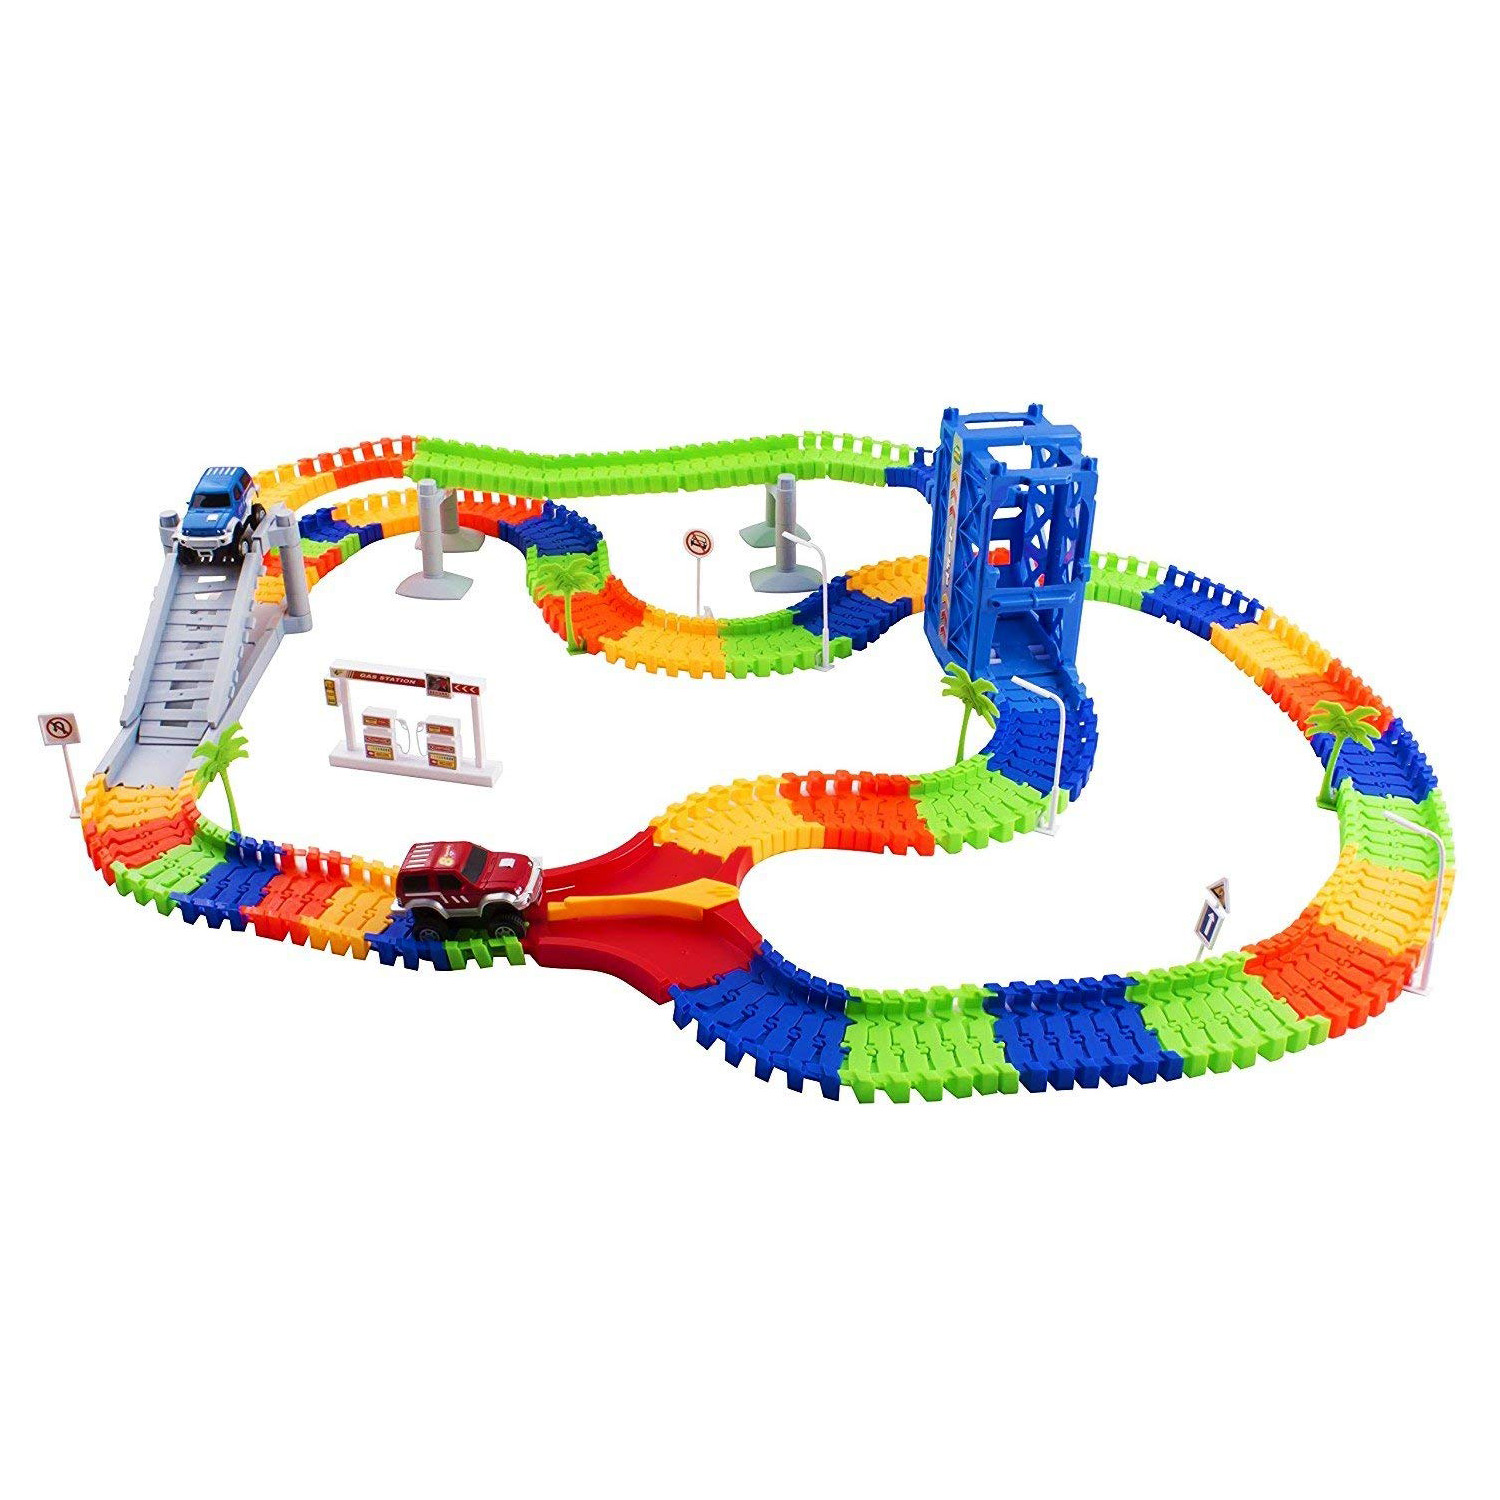 Race Car Track Set Toy Educational Twisted Flexible Building Tracks 240 Pieces Racetrack 2 Cars with Lifter Bridge Trees Gas Station for Children Ages 3 4 5 6 Year old Kids Toys Unisex Boys And Girls